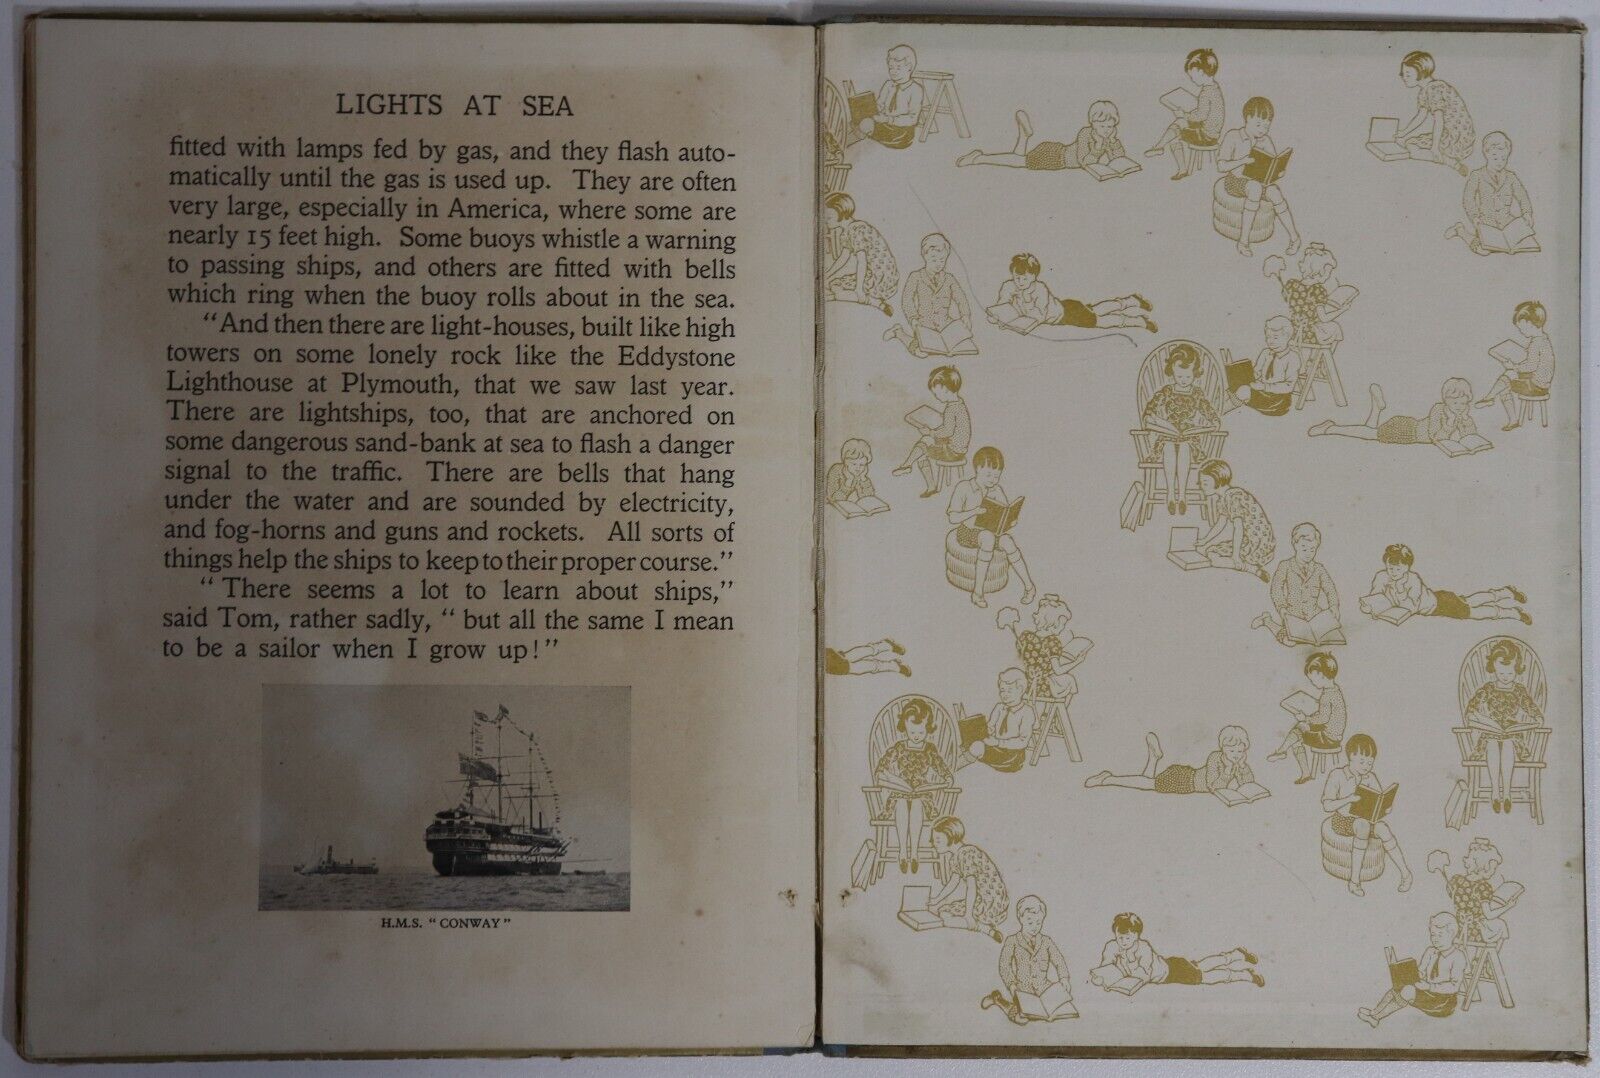 The Golden Picture Book Of Ships - c1949 - Antique Children's Maritime Book